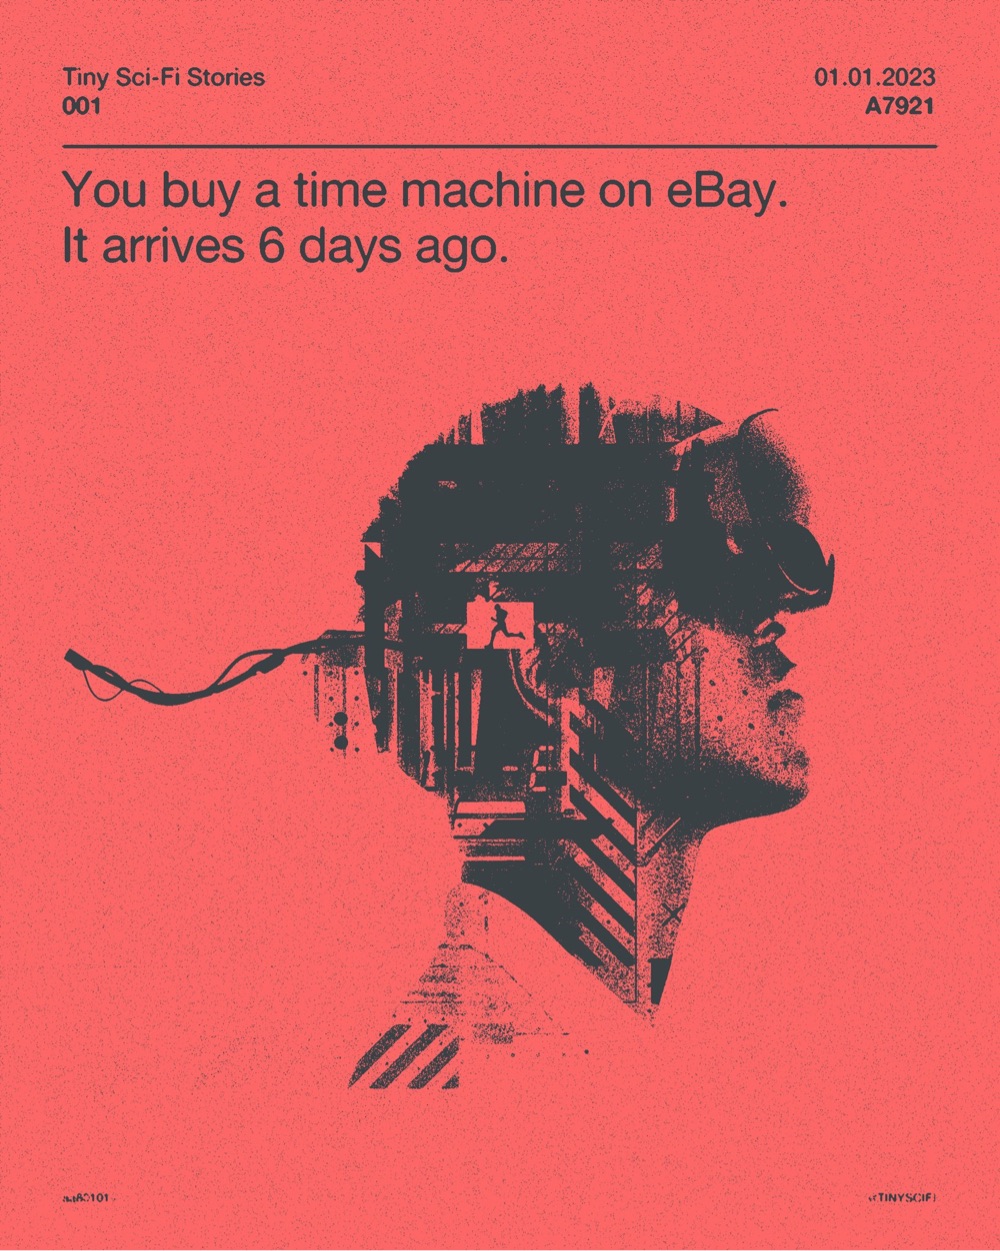 You buy a time machine on eBay. It arrives 6 days ago.